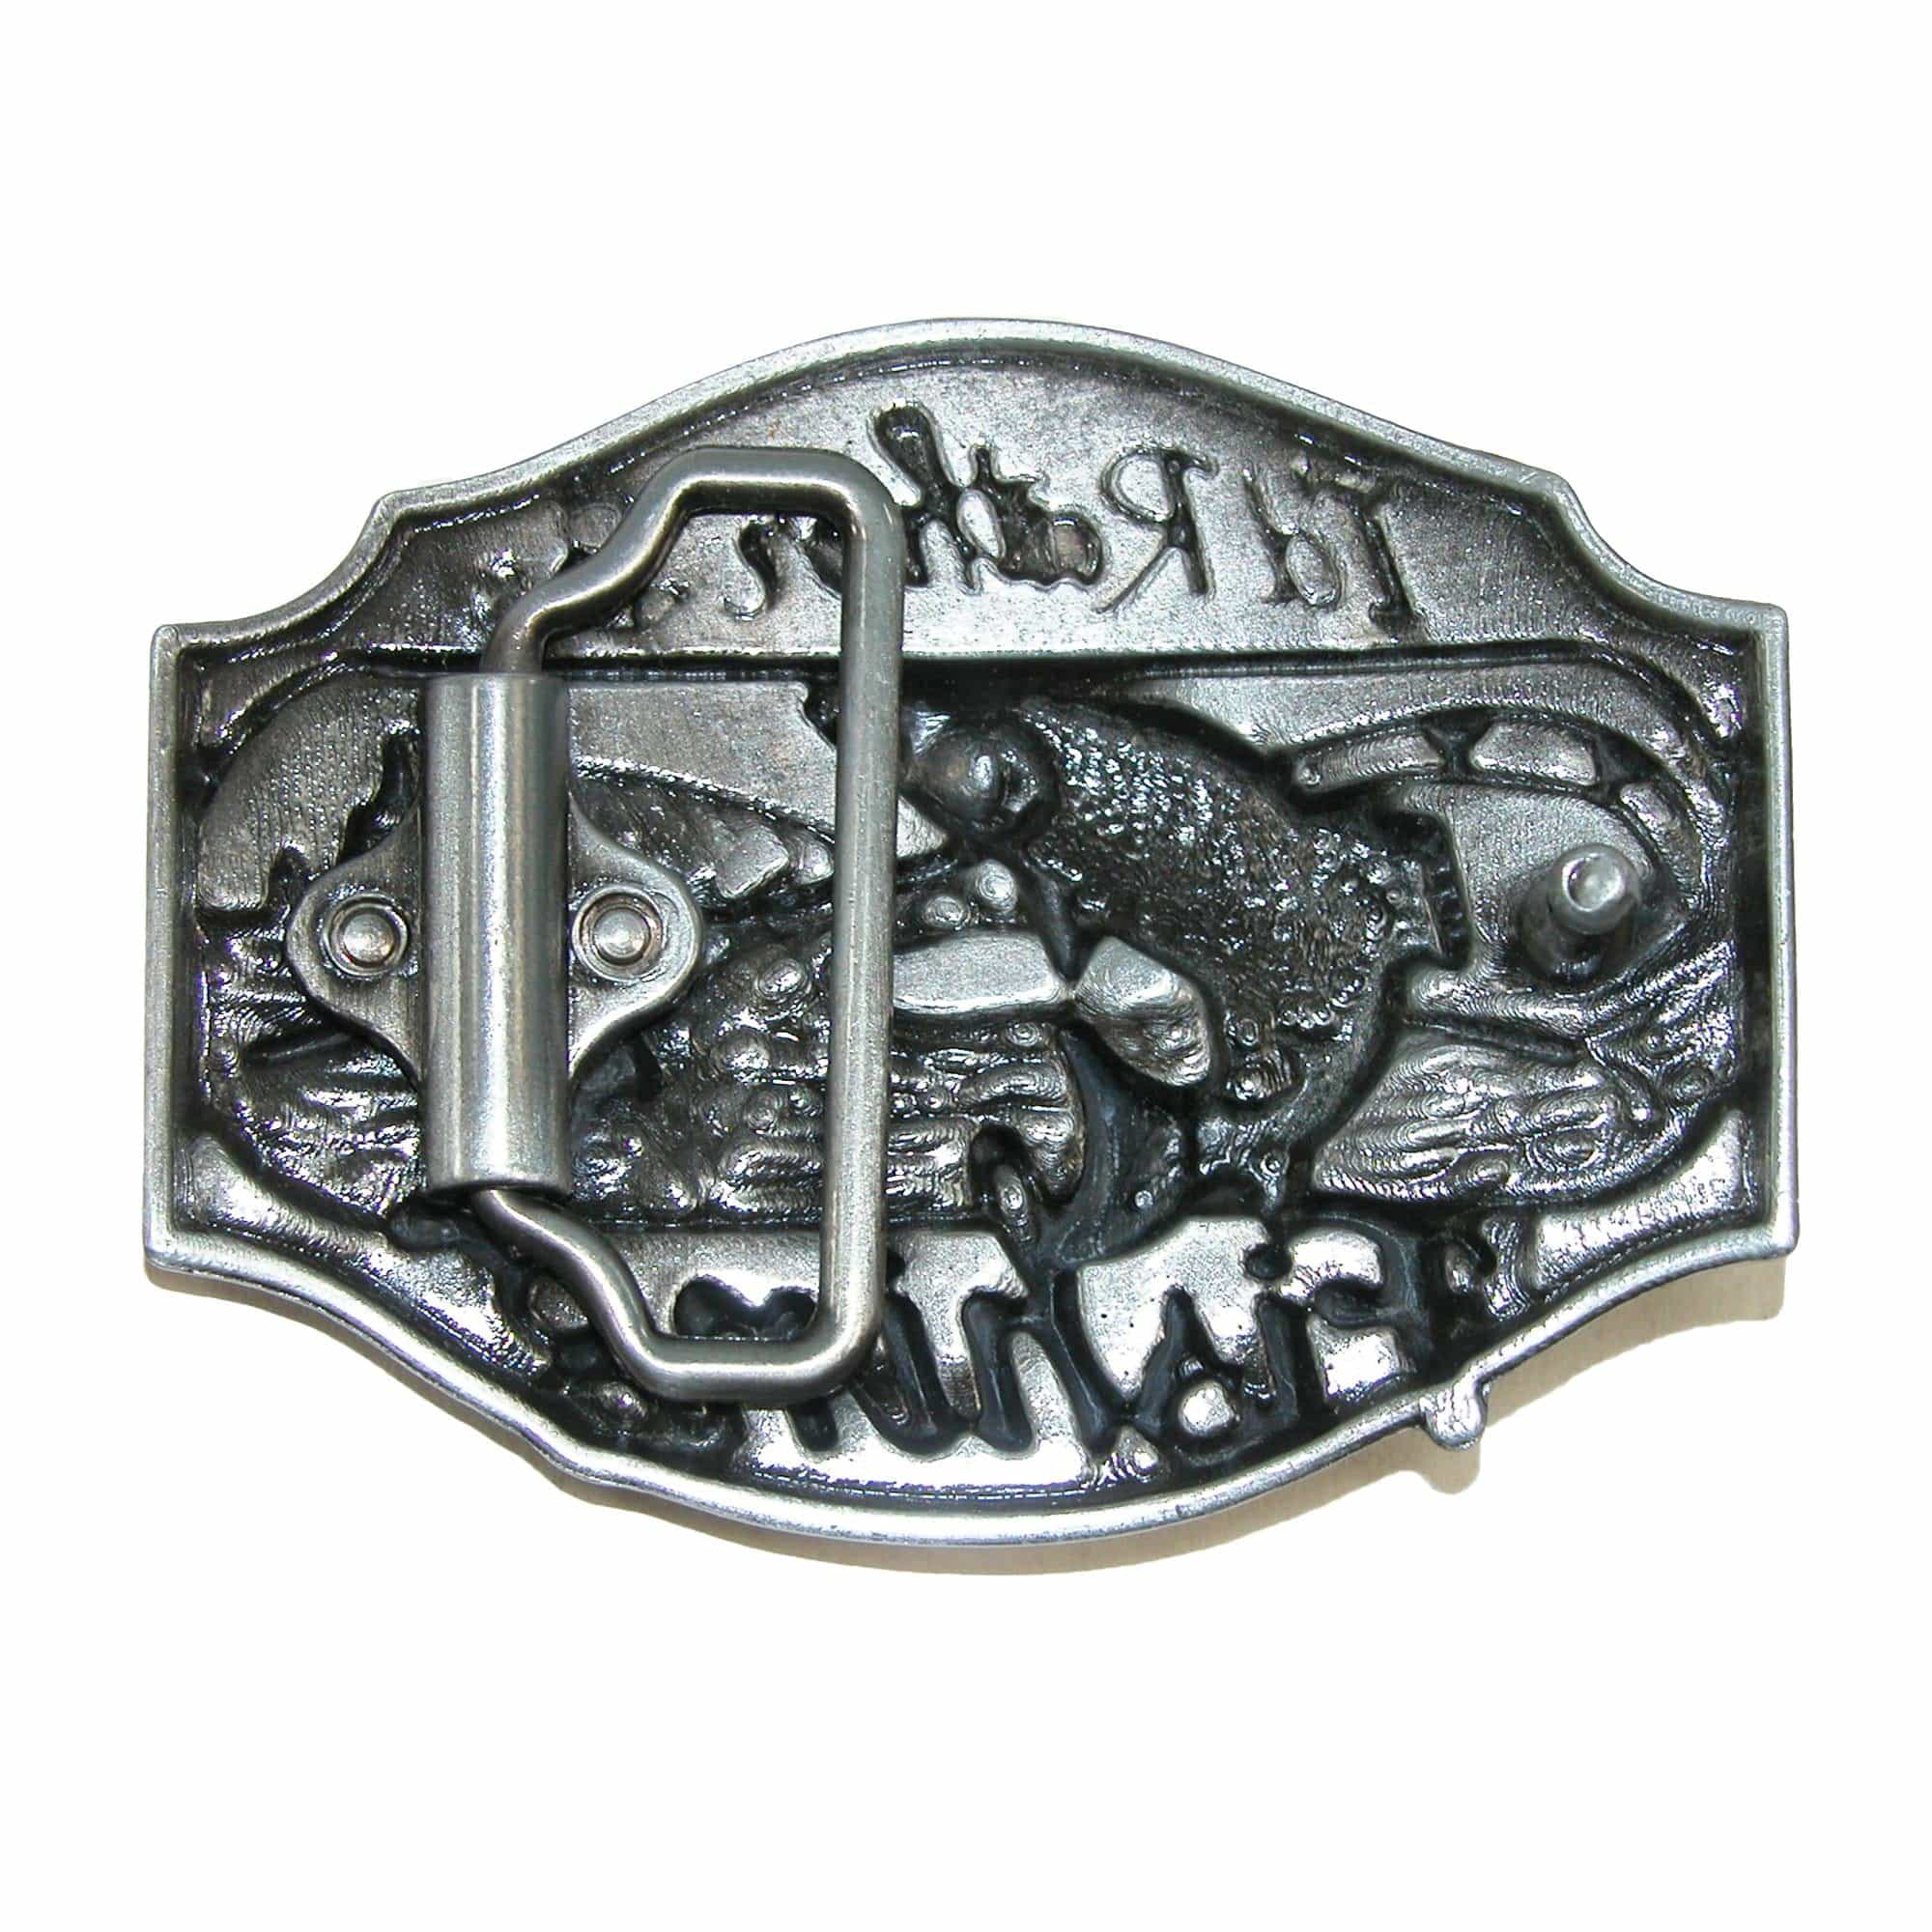 I'd Rather Be Fishing Belt Buckle by CTM